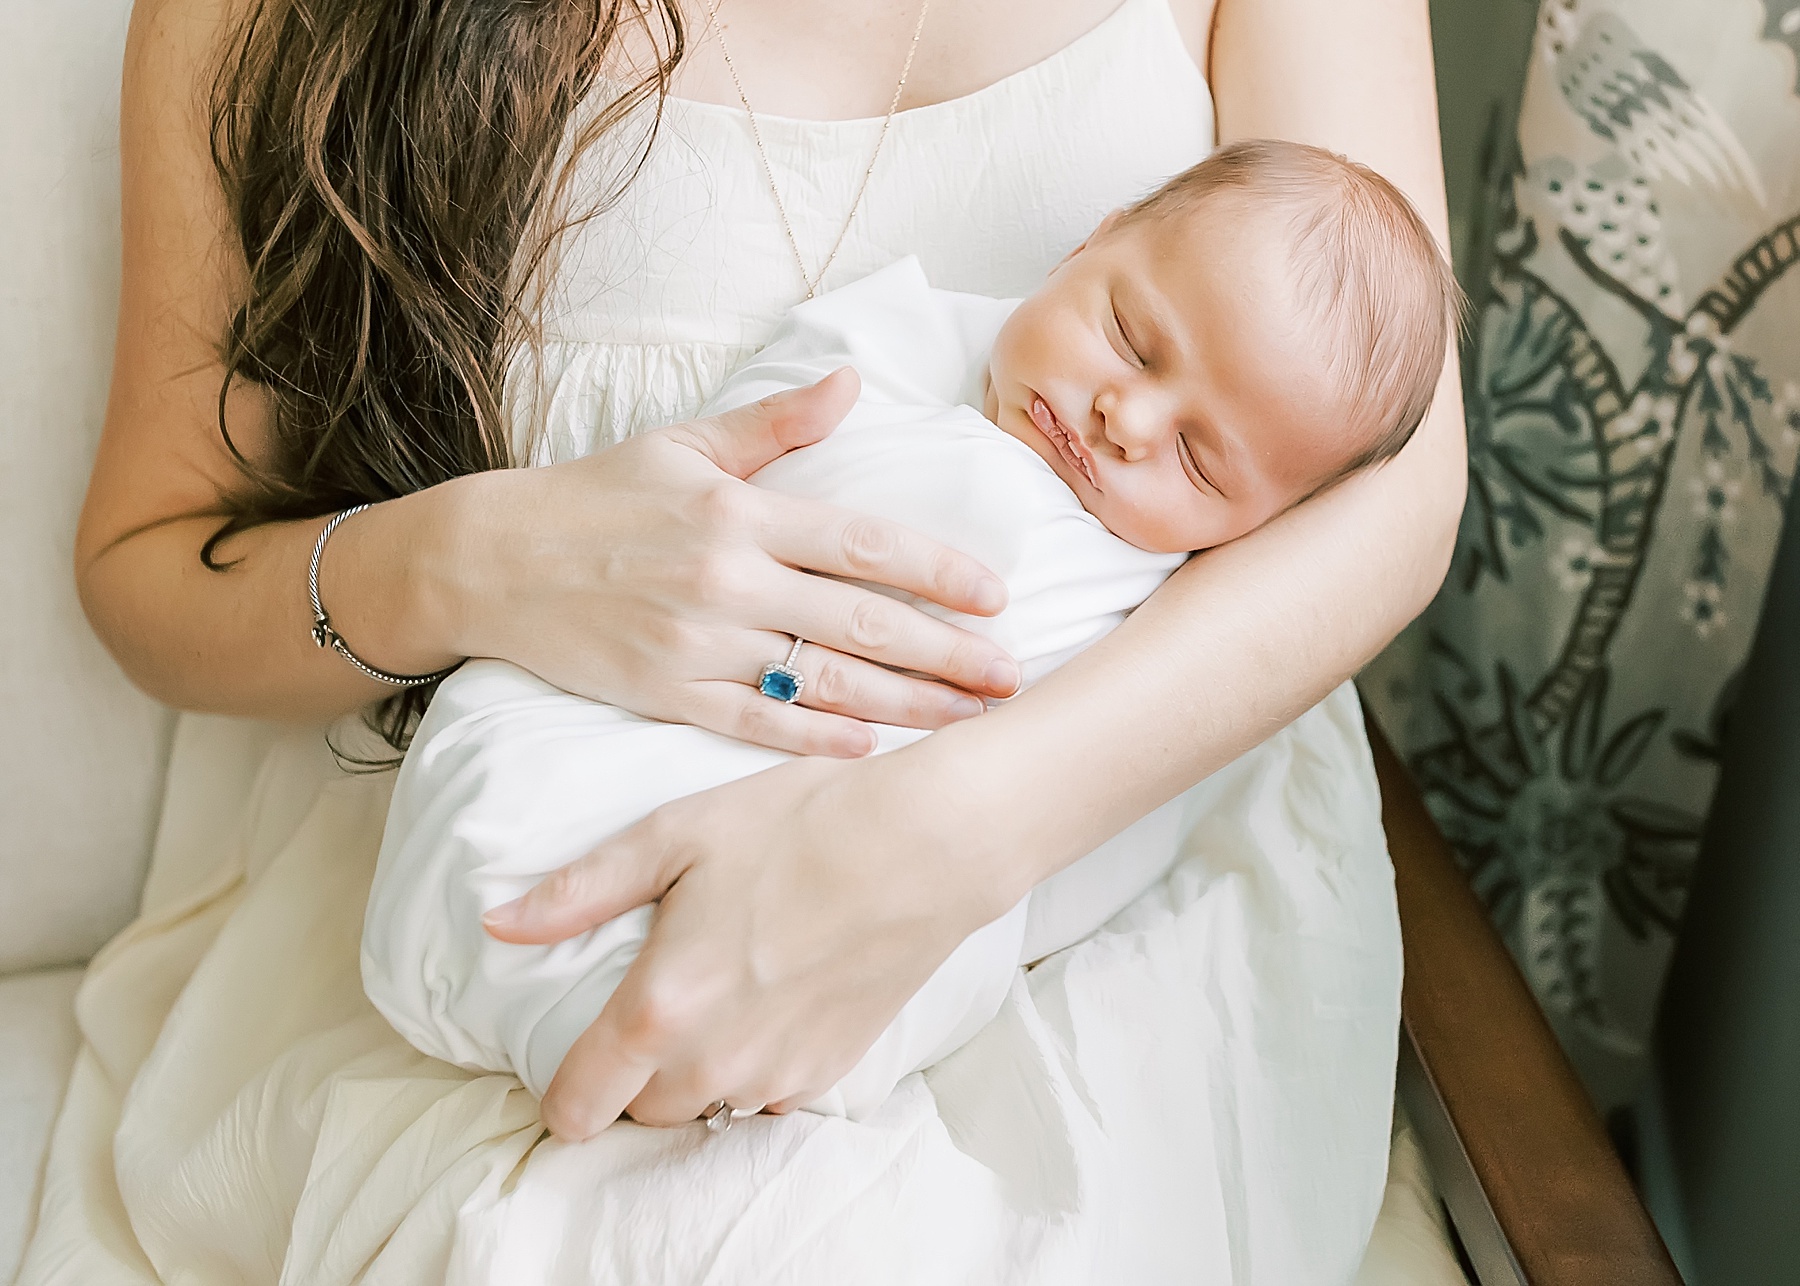 woman wearing blue stone ring holding newborn baby boy wrapped in white blanket